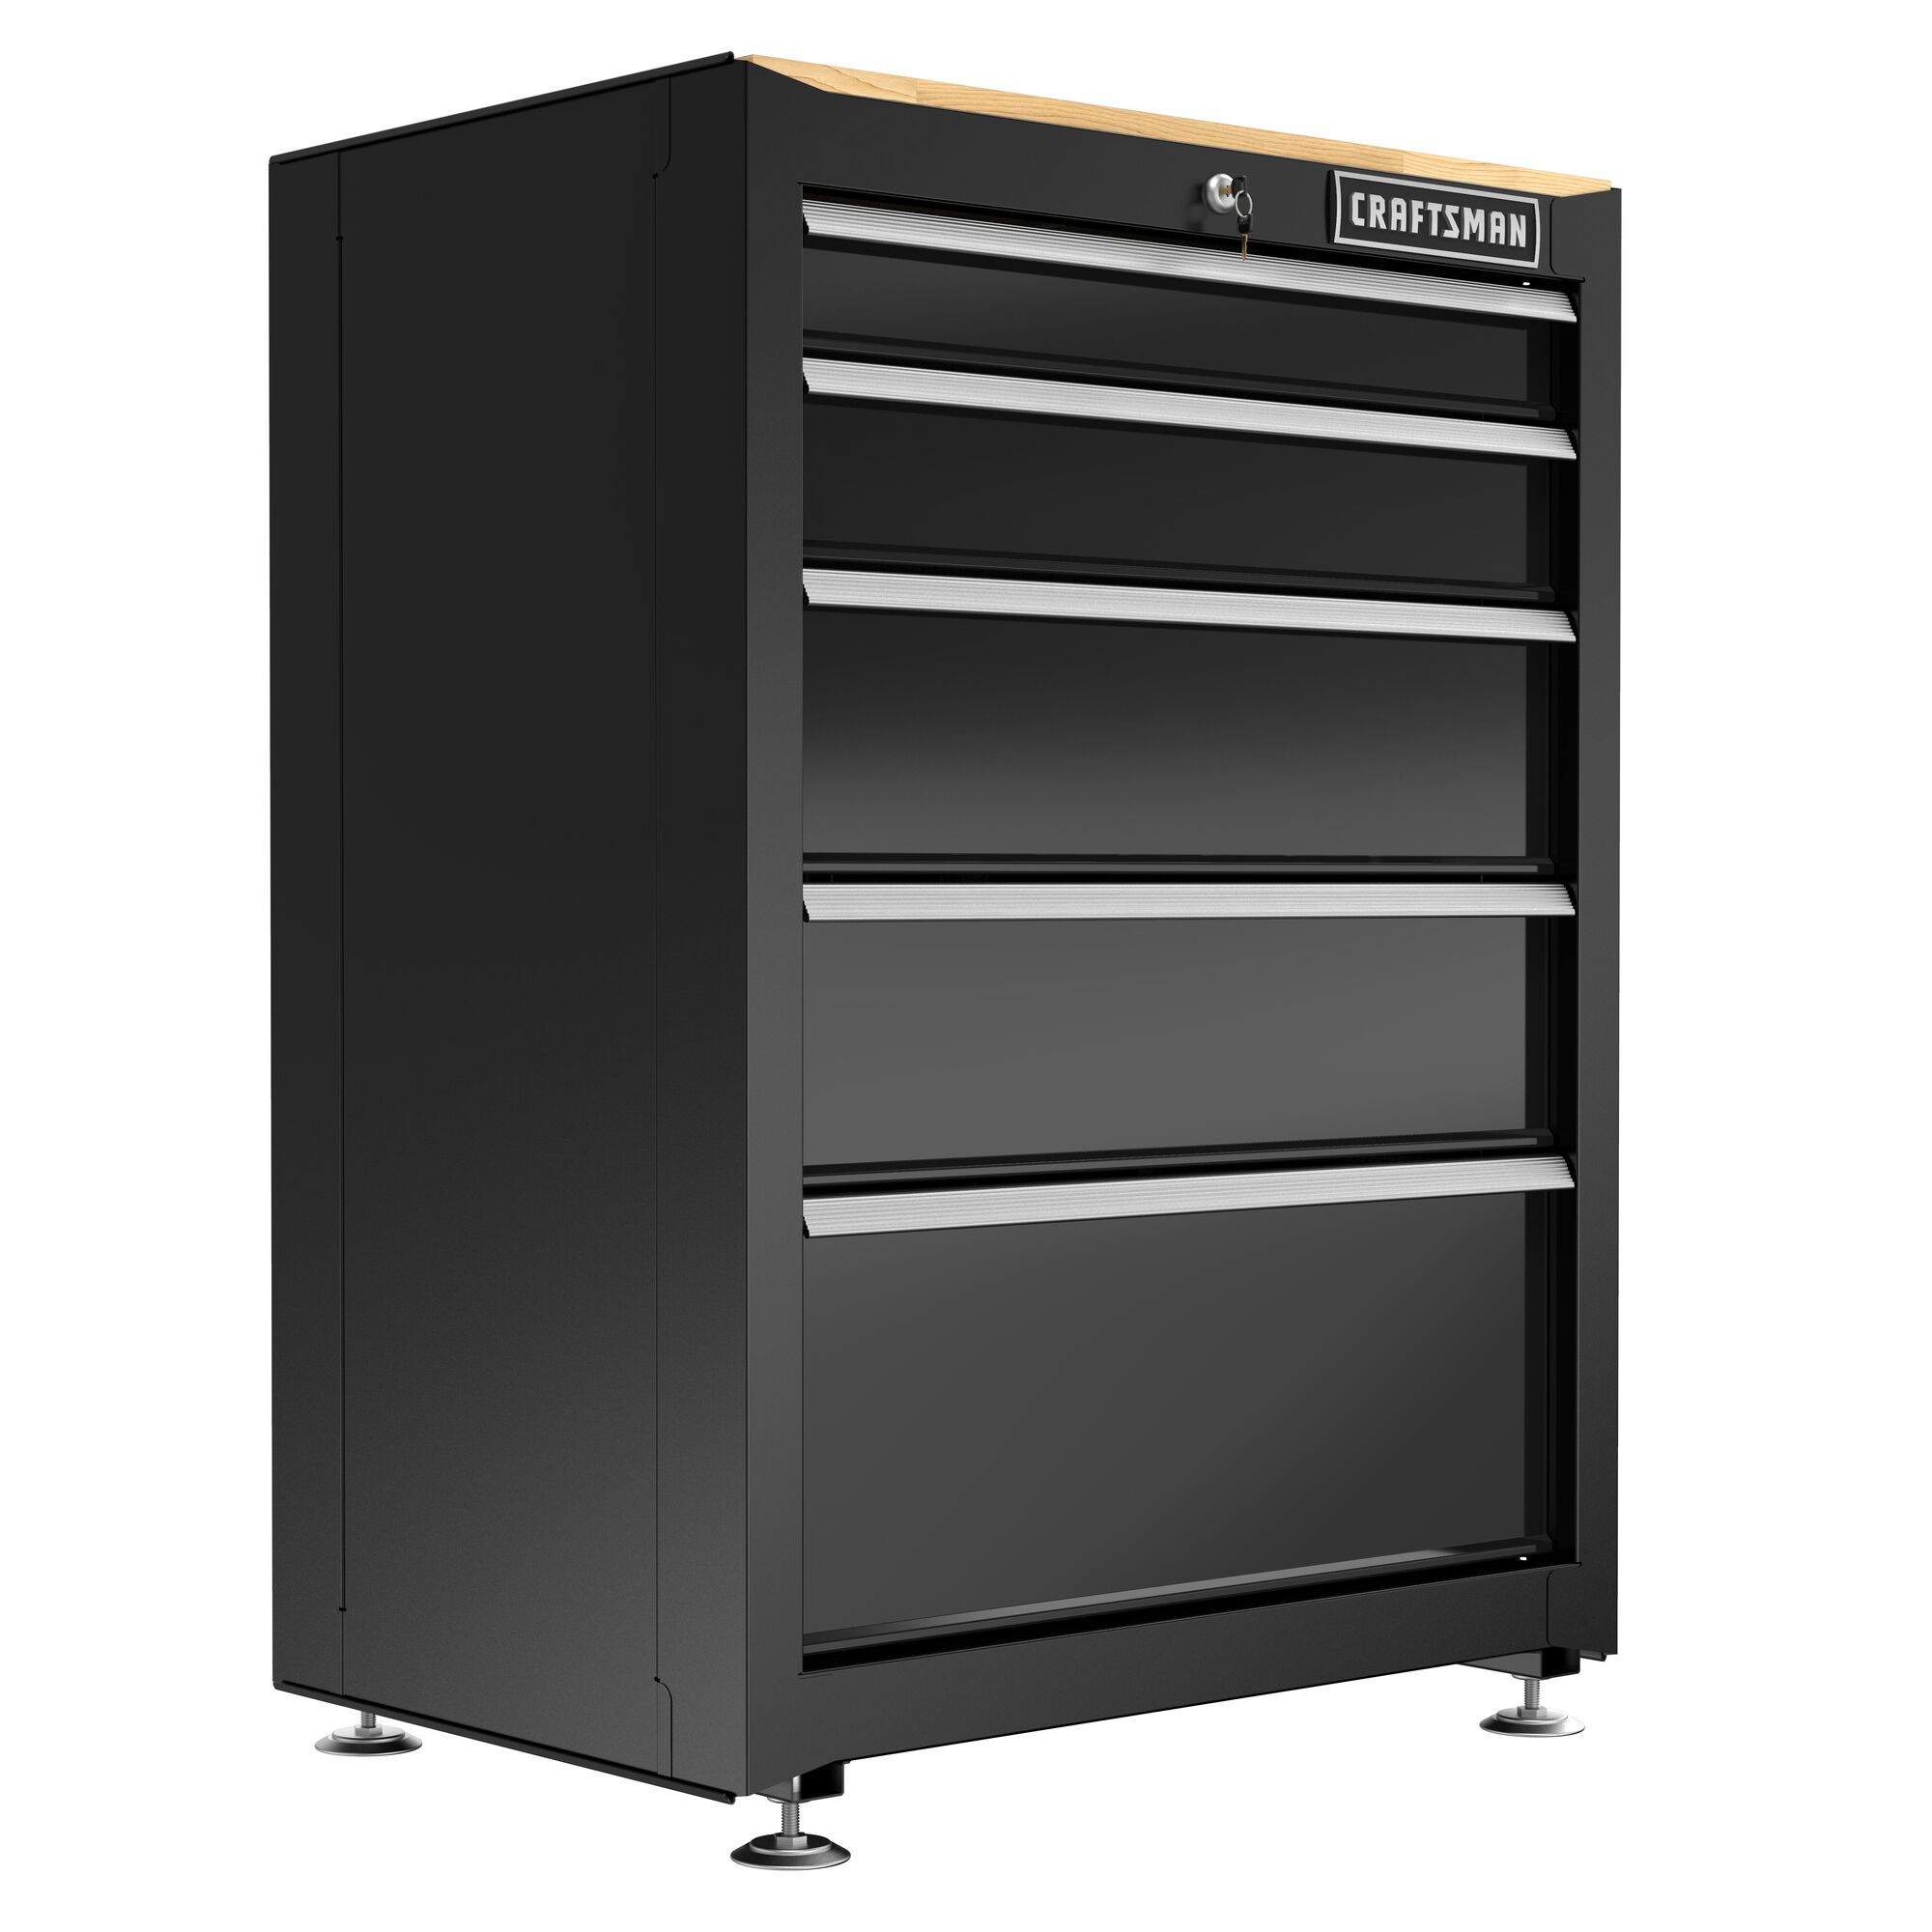 CRAFTSMAN 26.5-in wide 5-drawer base cabinet angled view